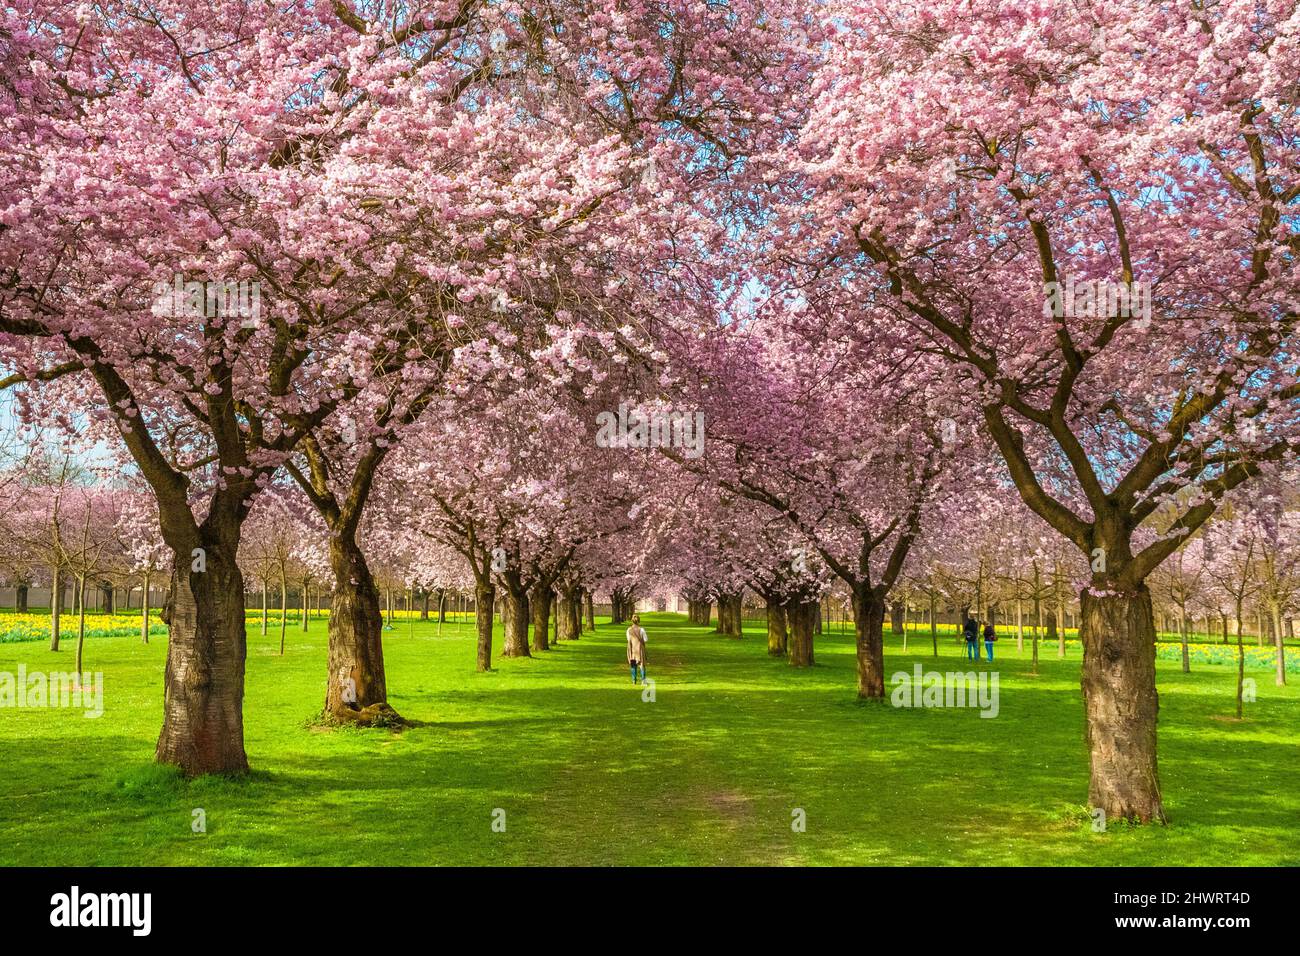 A woman stands in the middle of the popular avenue of blooming Japanese ornamental cherry trees in the famous garden of the Schwetzingen Palace in... Stock Photo